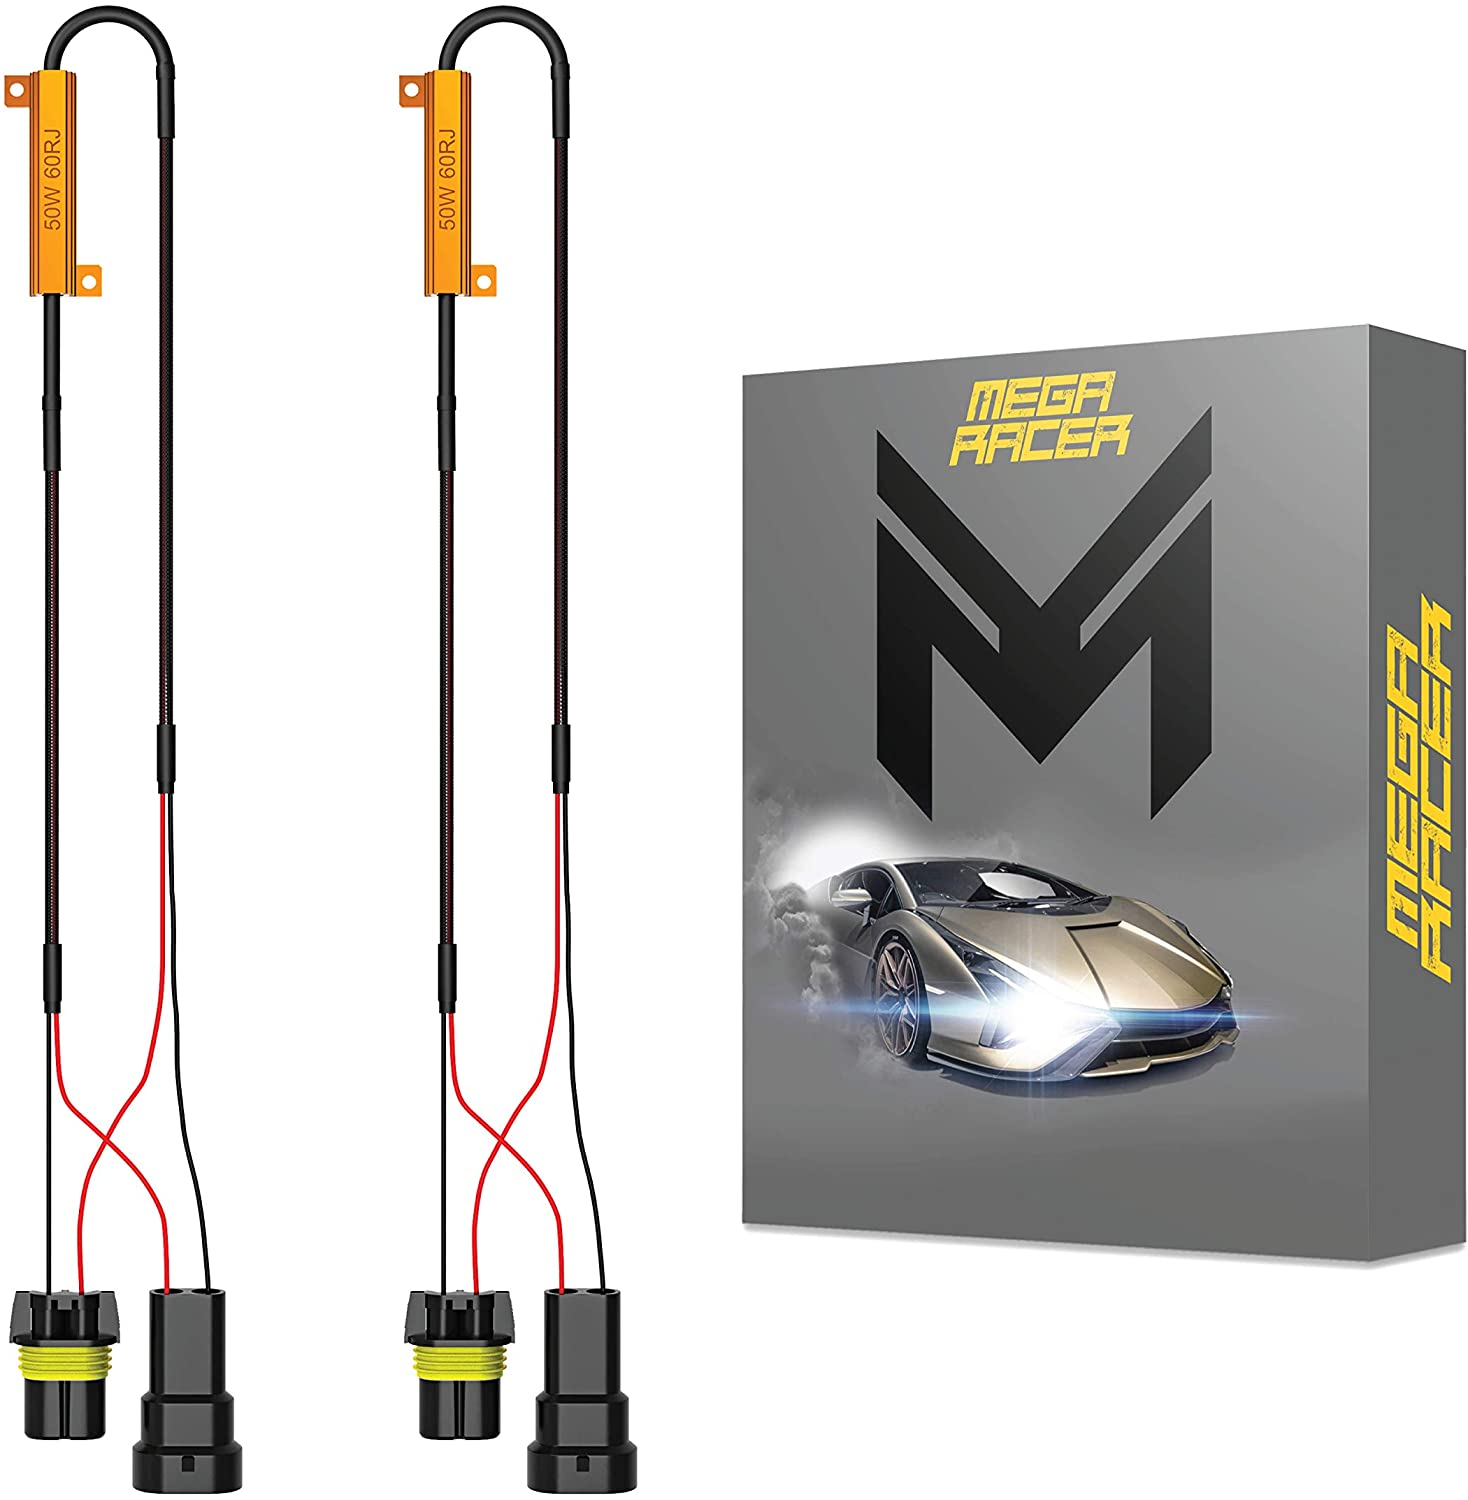 Mega Racer H11 LED Headlight Load Resistor - 50W 8 ohm - Dashboard Light Error Canceller and Flickering Resolution for LED Headlights - 2 Pieces